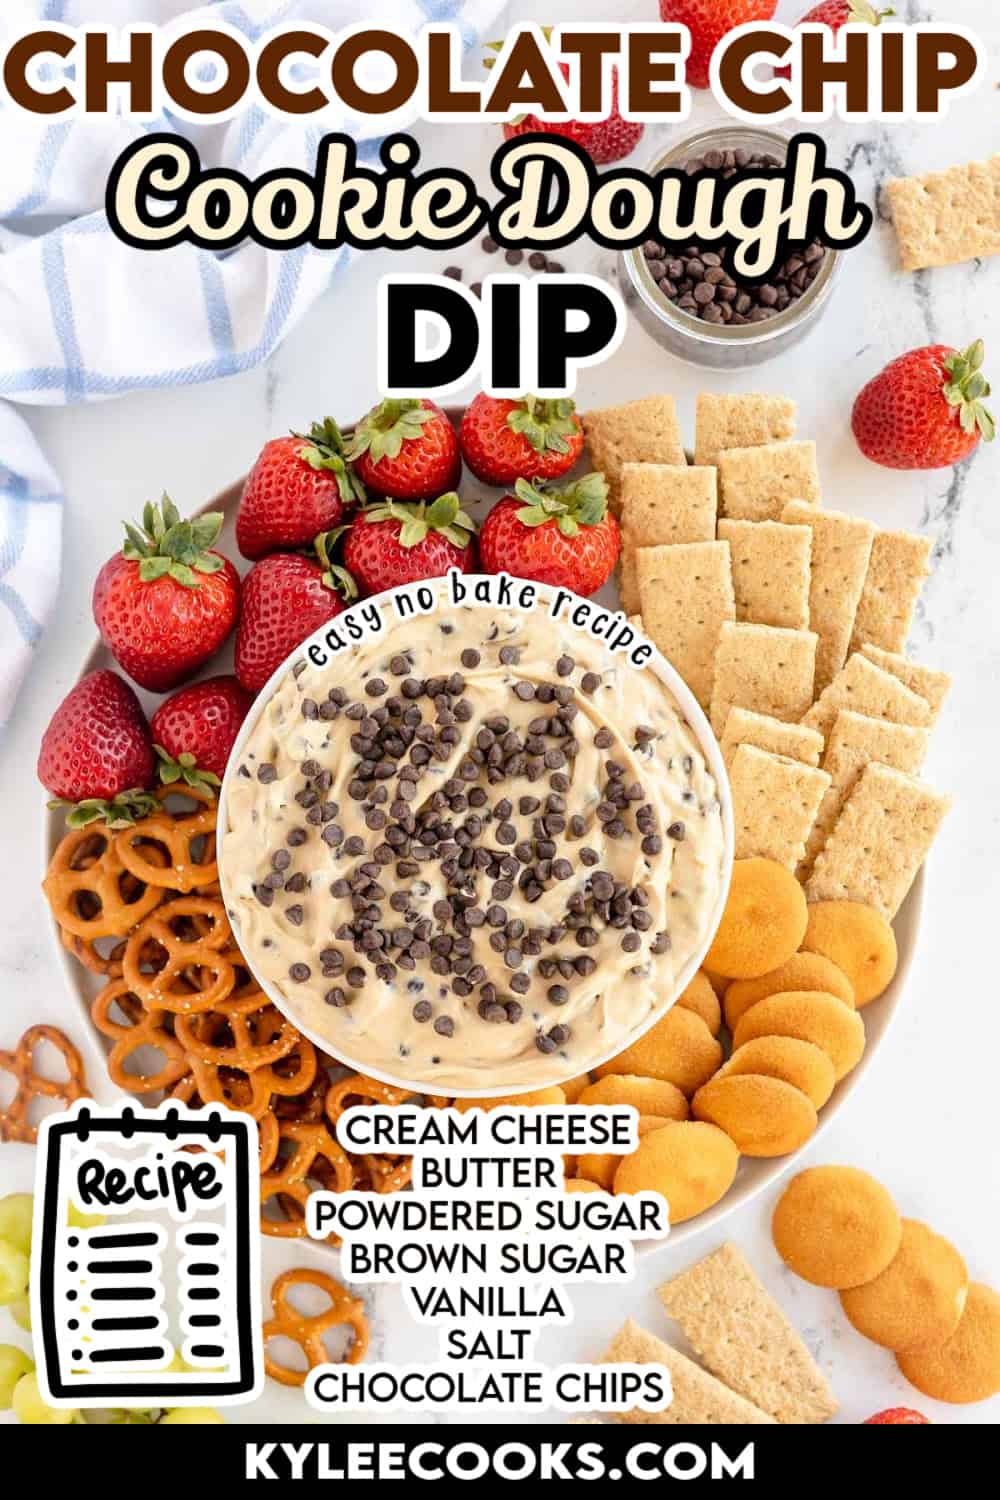 Chocolate chip cookie dough dip with and pretzels with recipe and ingredients overlaid in text.